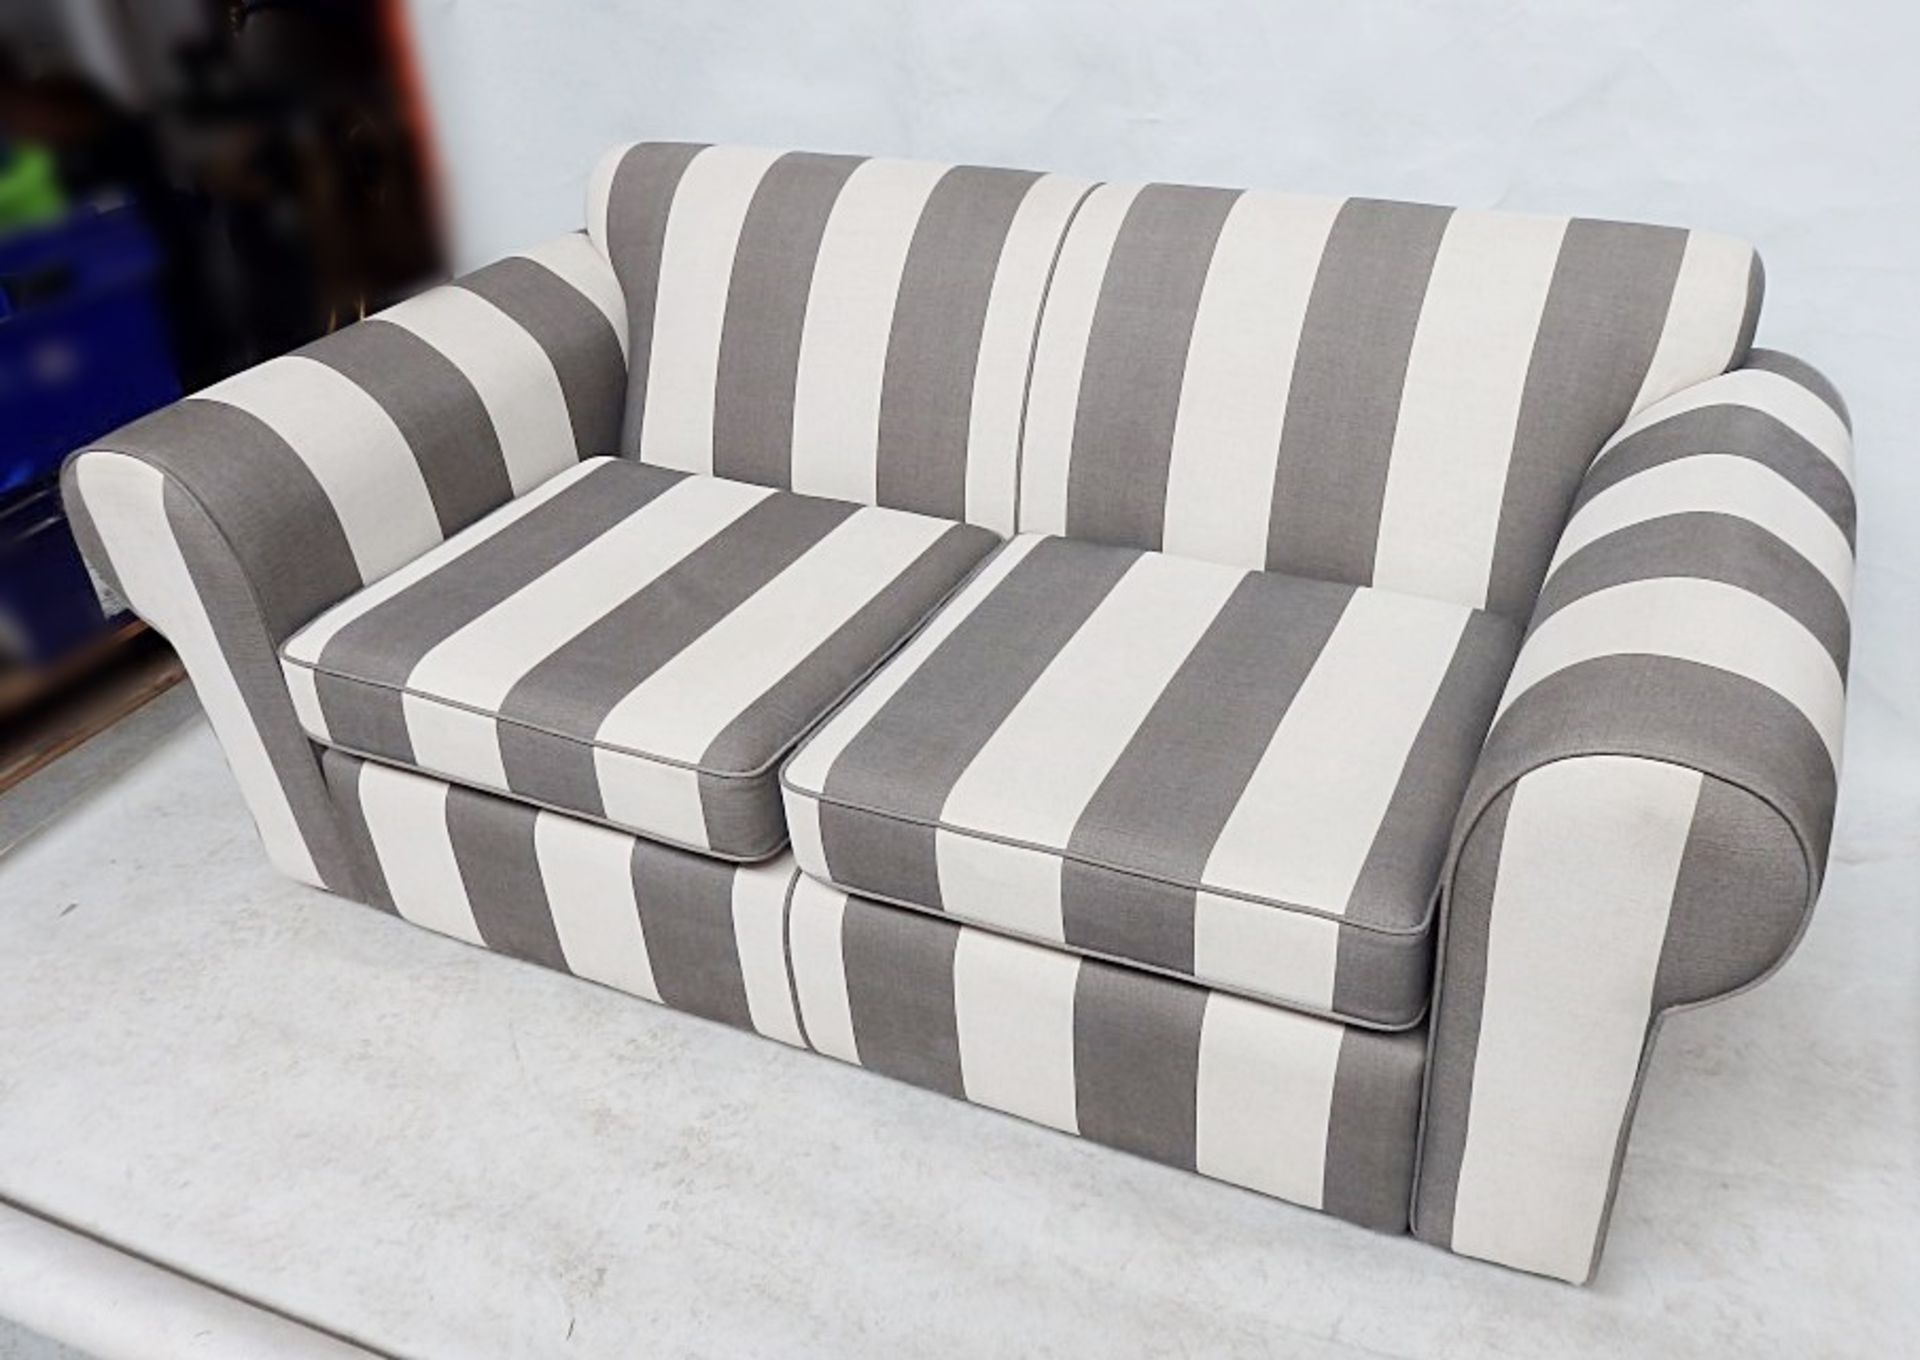 1 x Sumptuous Bespoke Cream & Grey Striped Sofa - Expertly Built And Upholstered By British - Image 4 of 6